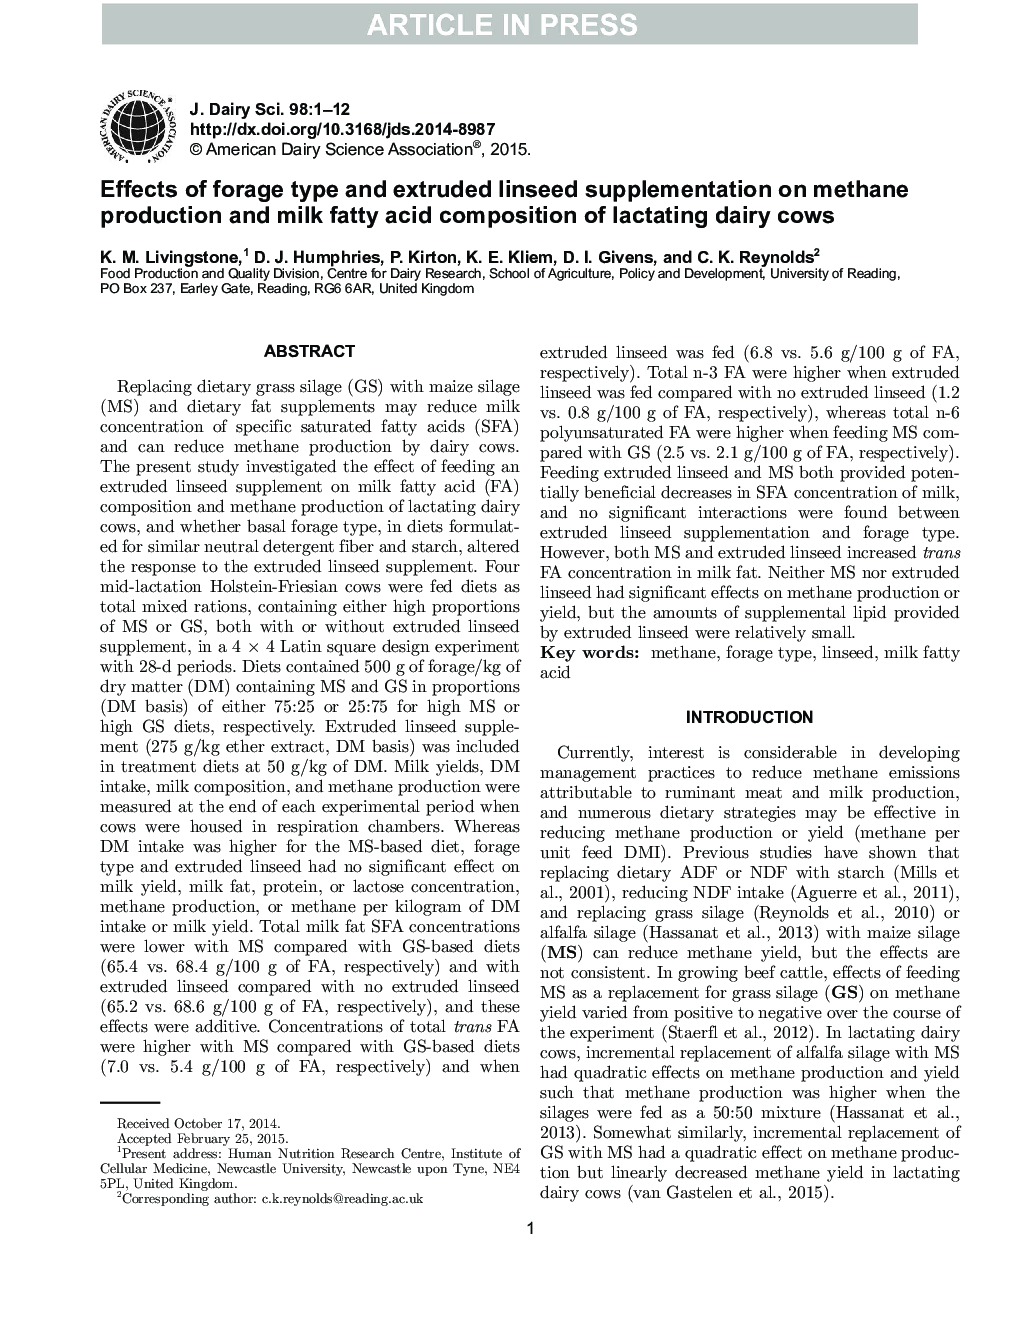 Effects of forage type and extruded linseed supplementation on methane production and milk fatty acid composition of lactating dairy cows